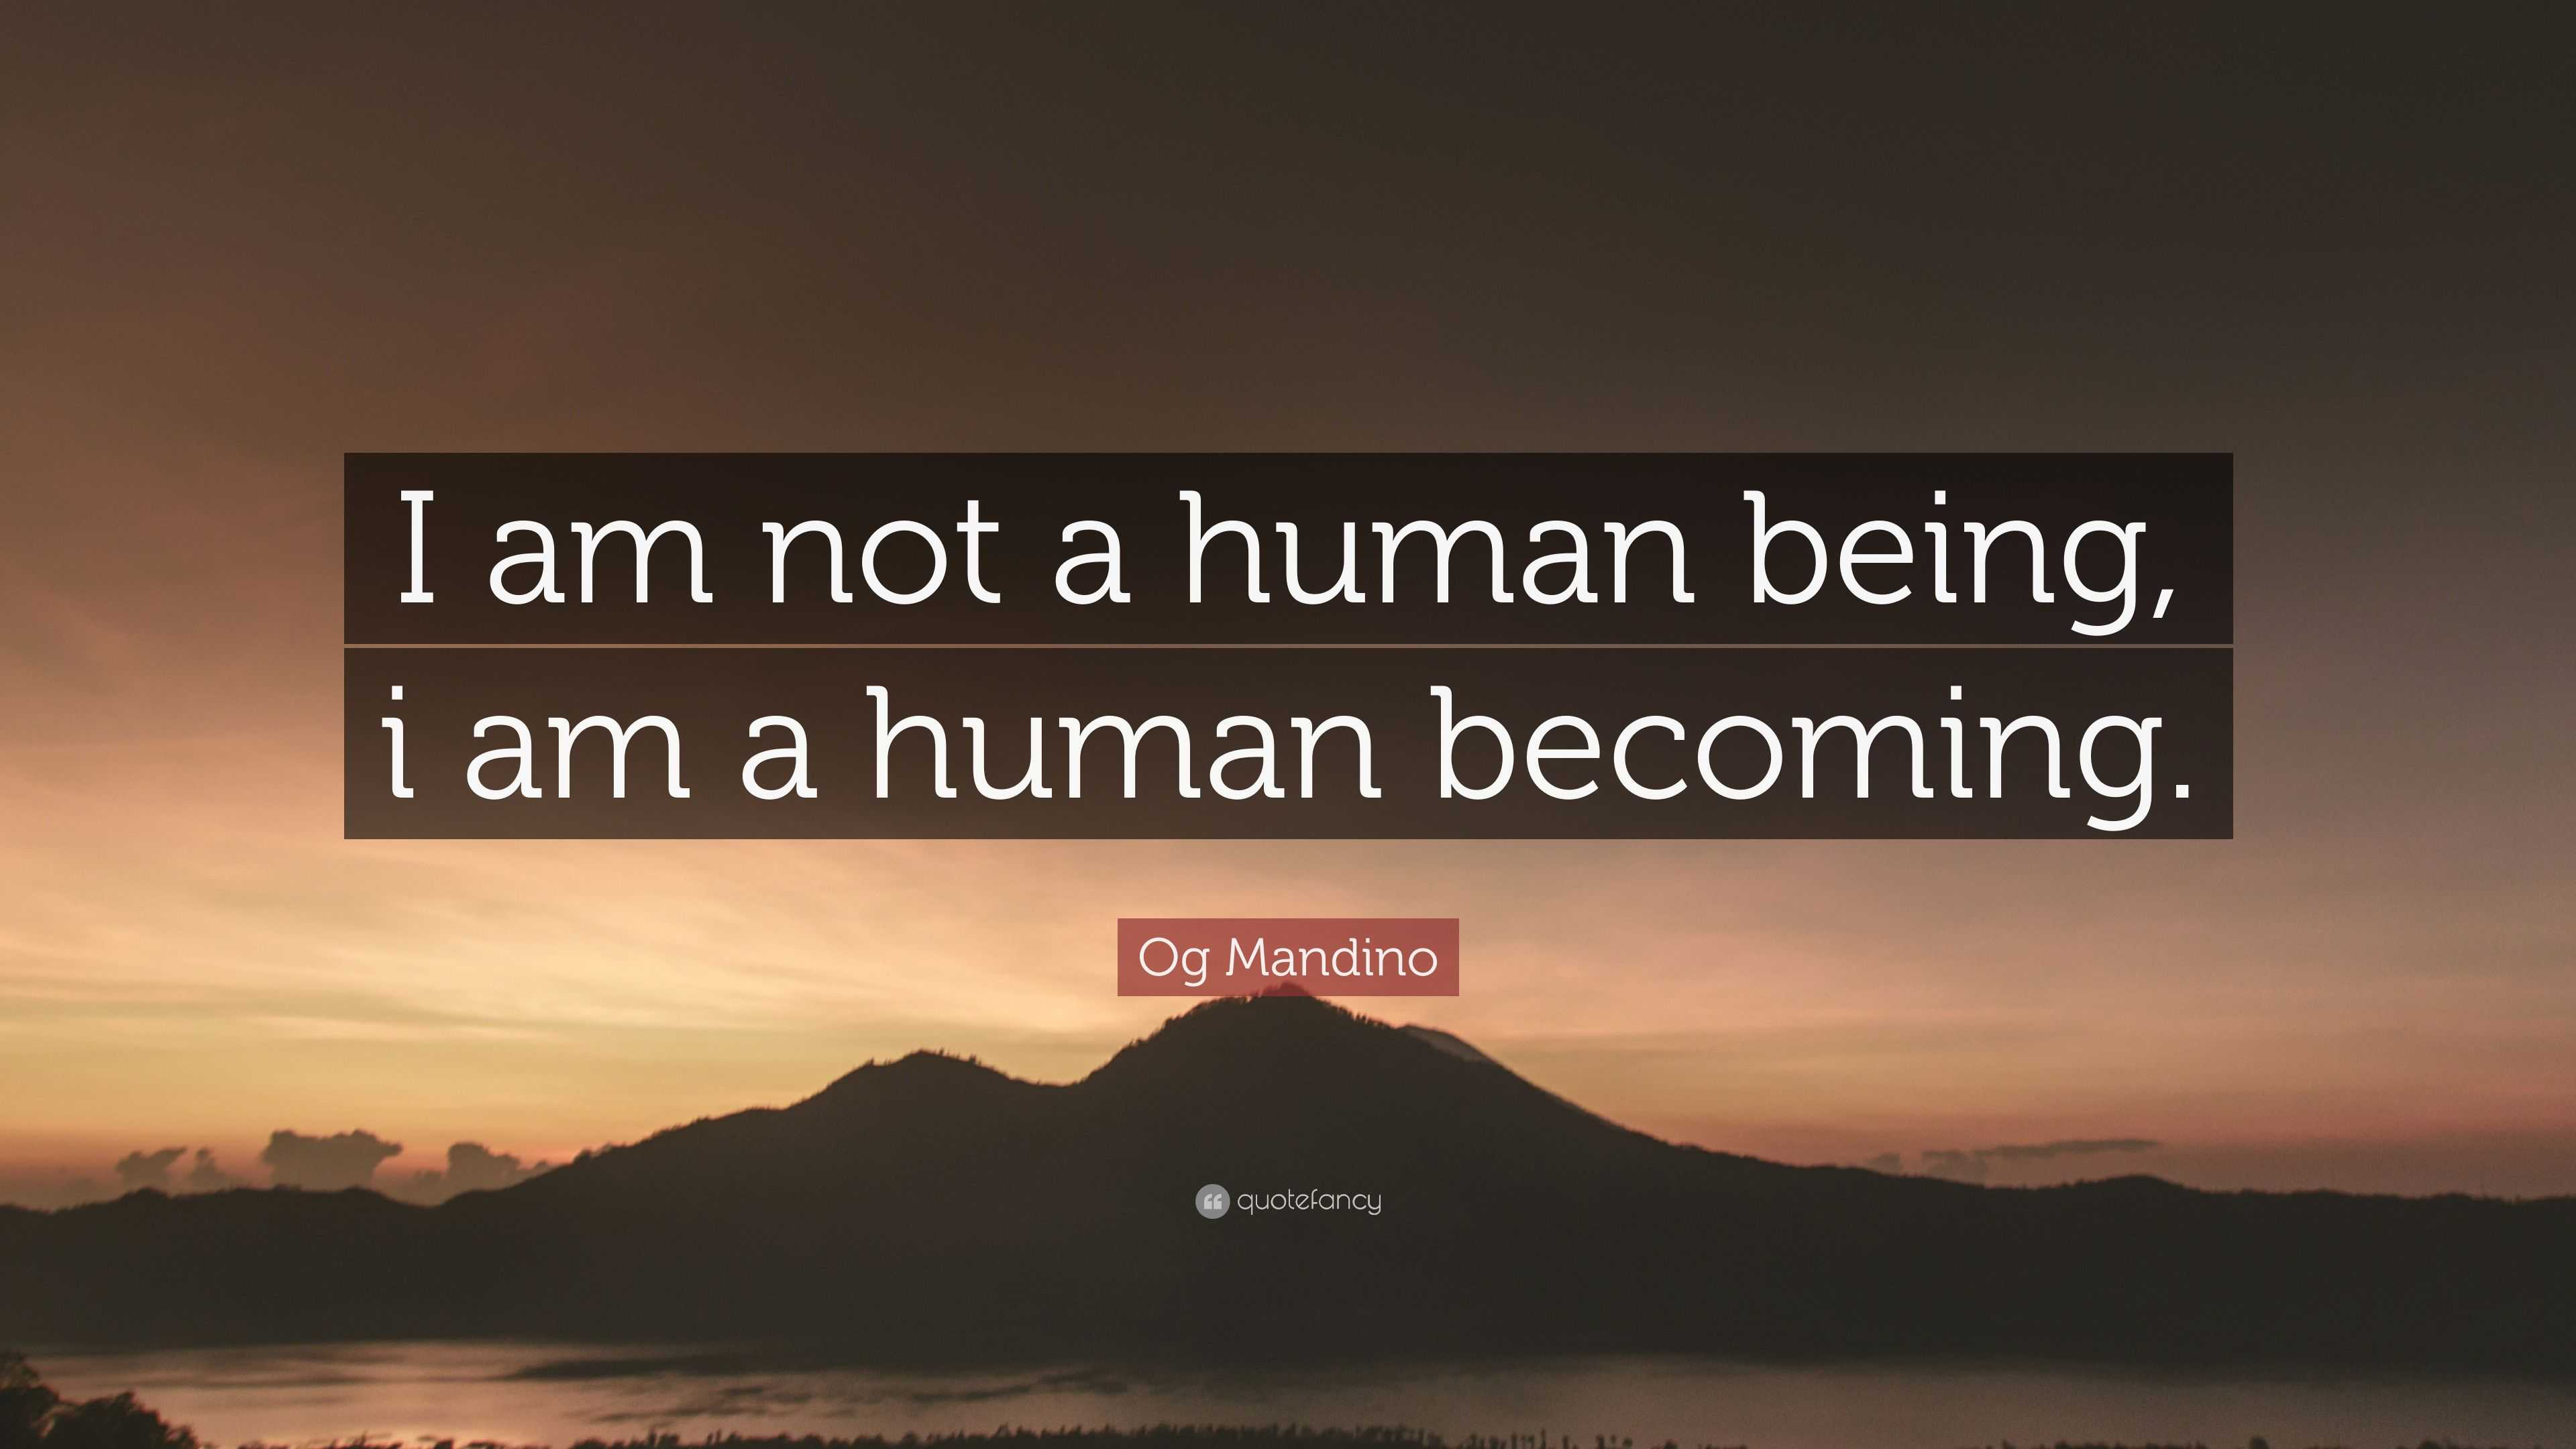 2149513 Og Mandino Quote I am not a human being i am a human becoming